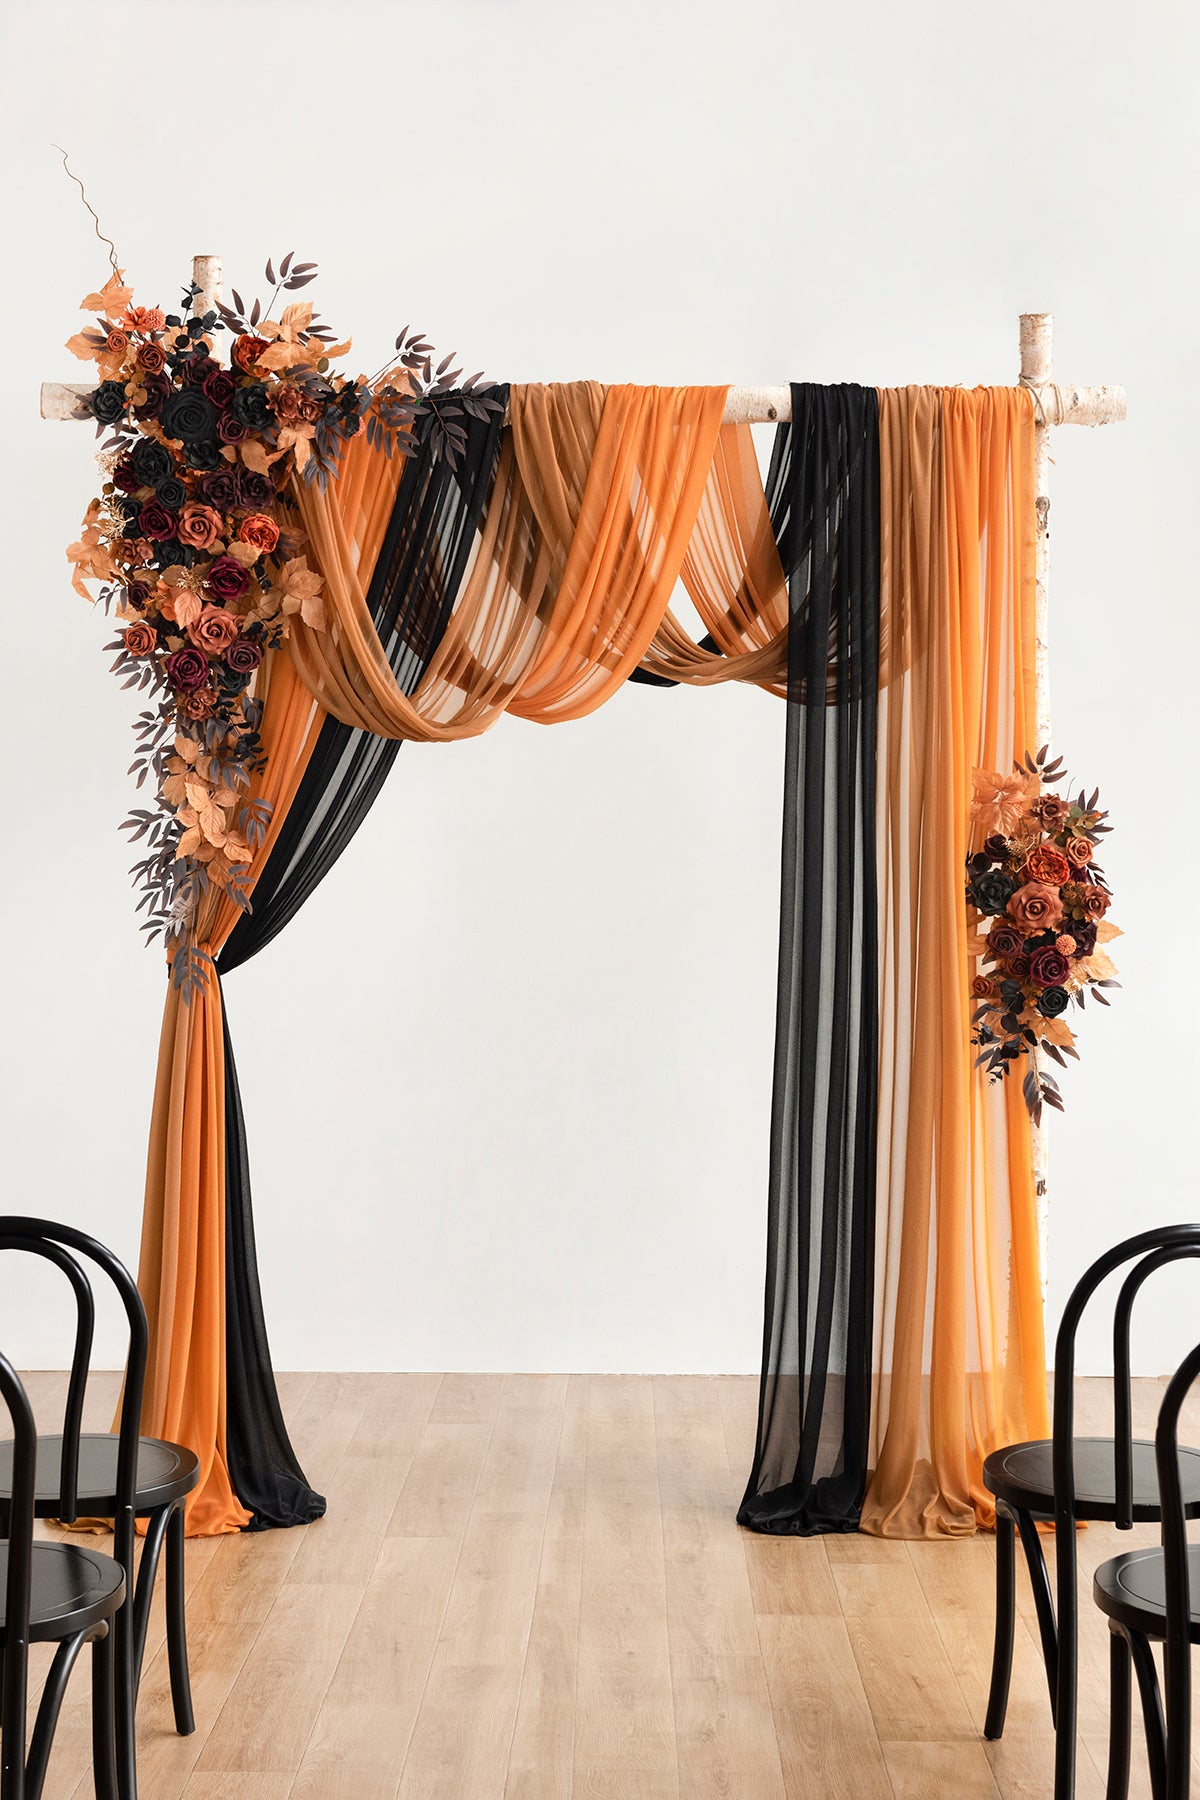 Flower Arch Decor with Drapes in Black & Pumpkin Orange | Clearance